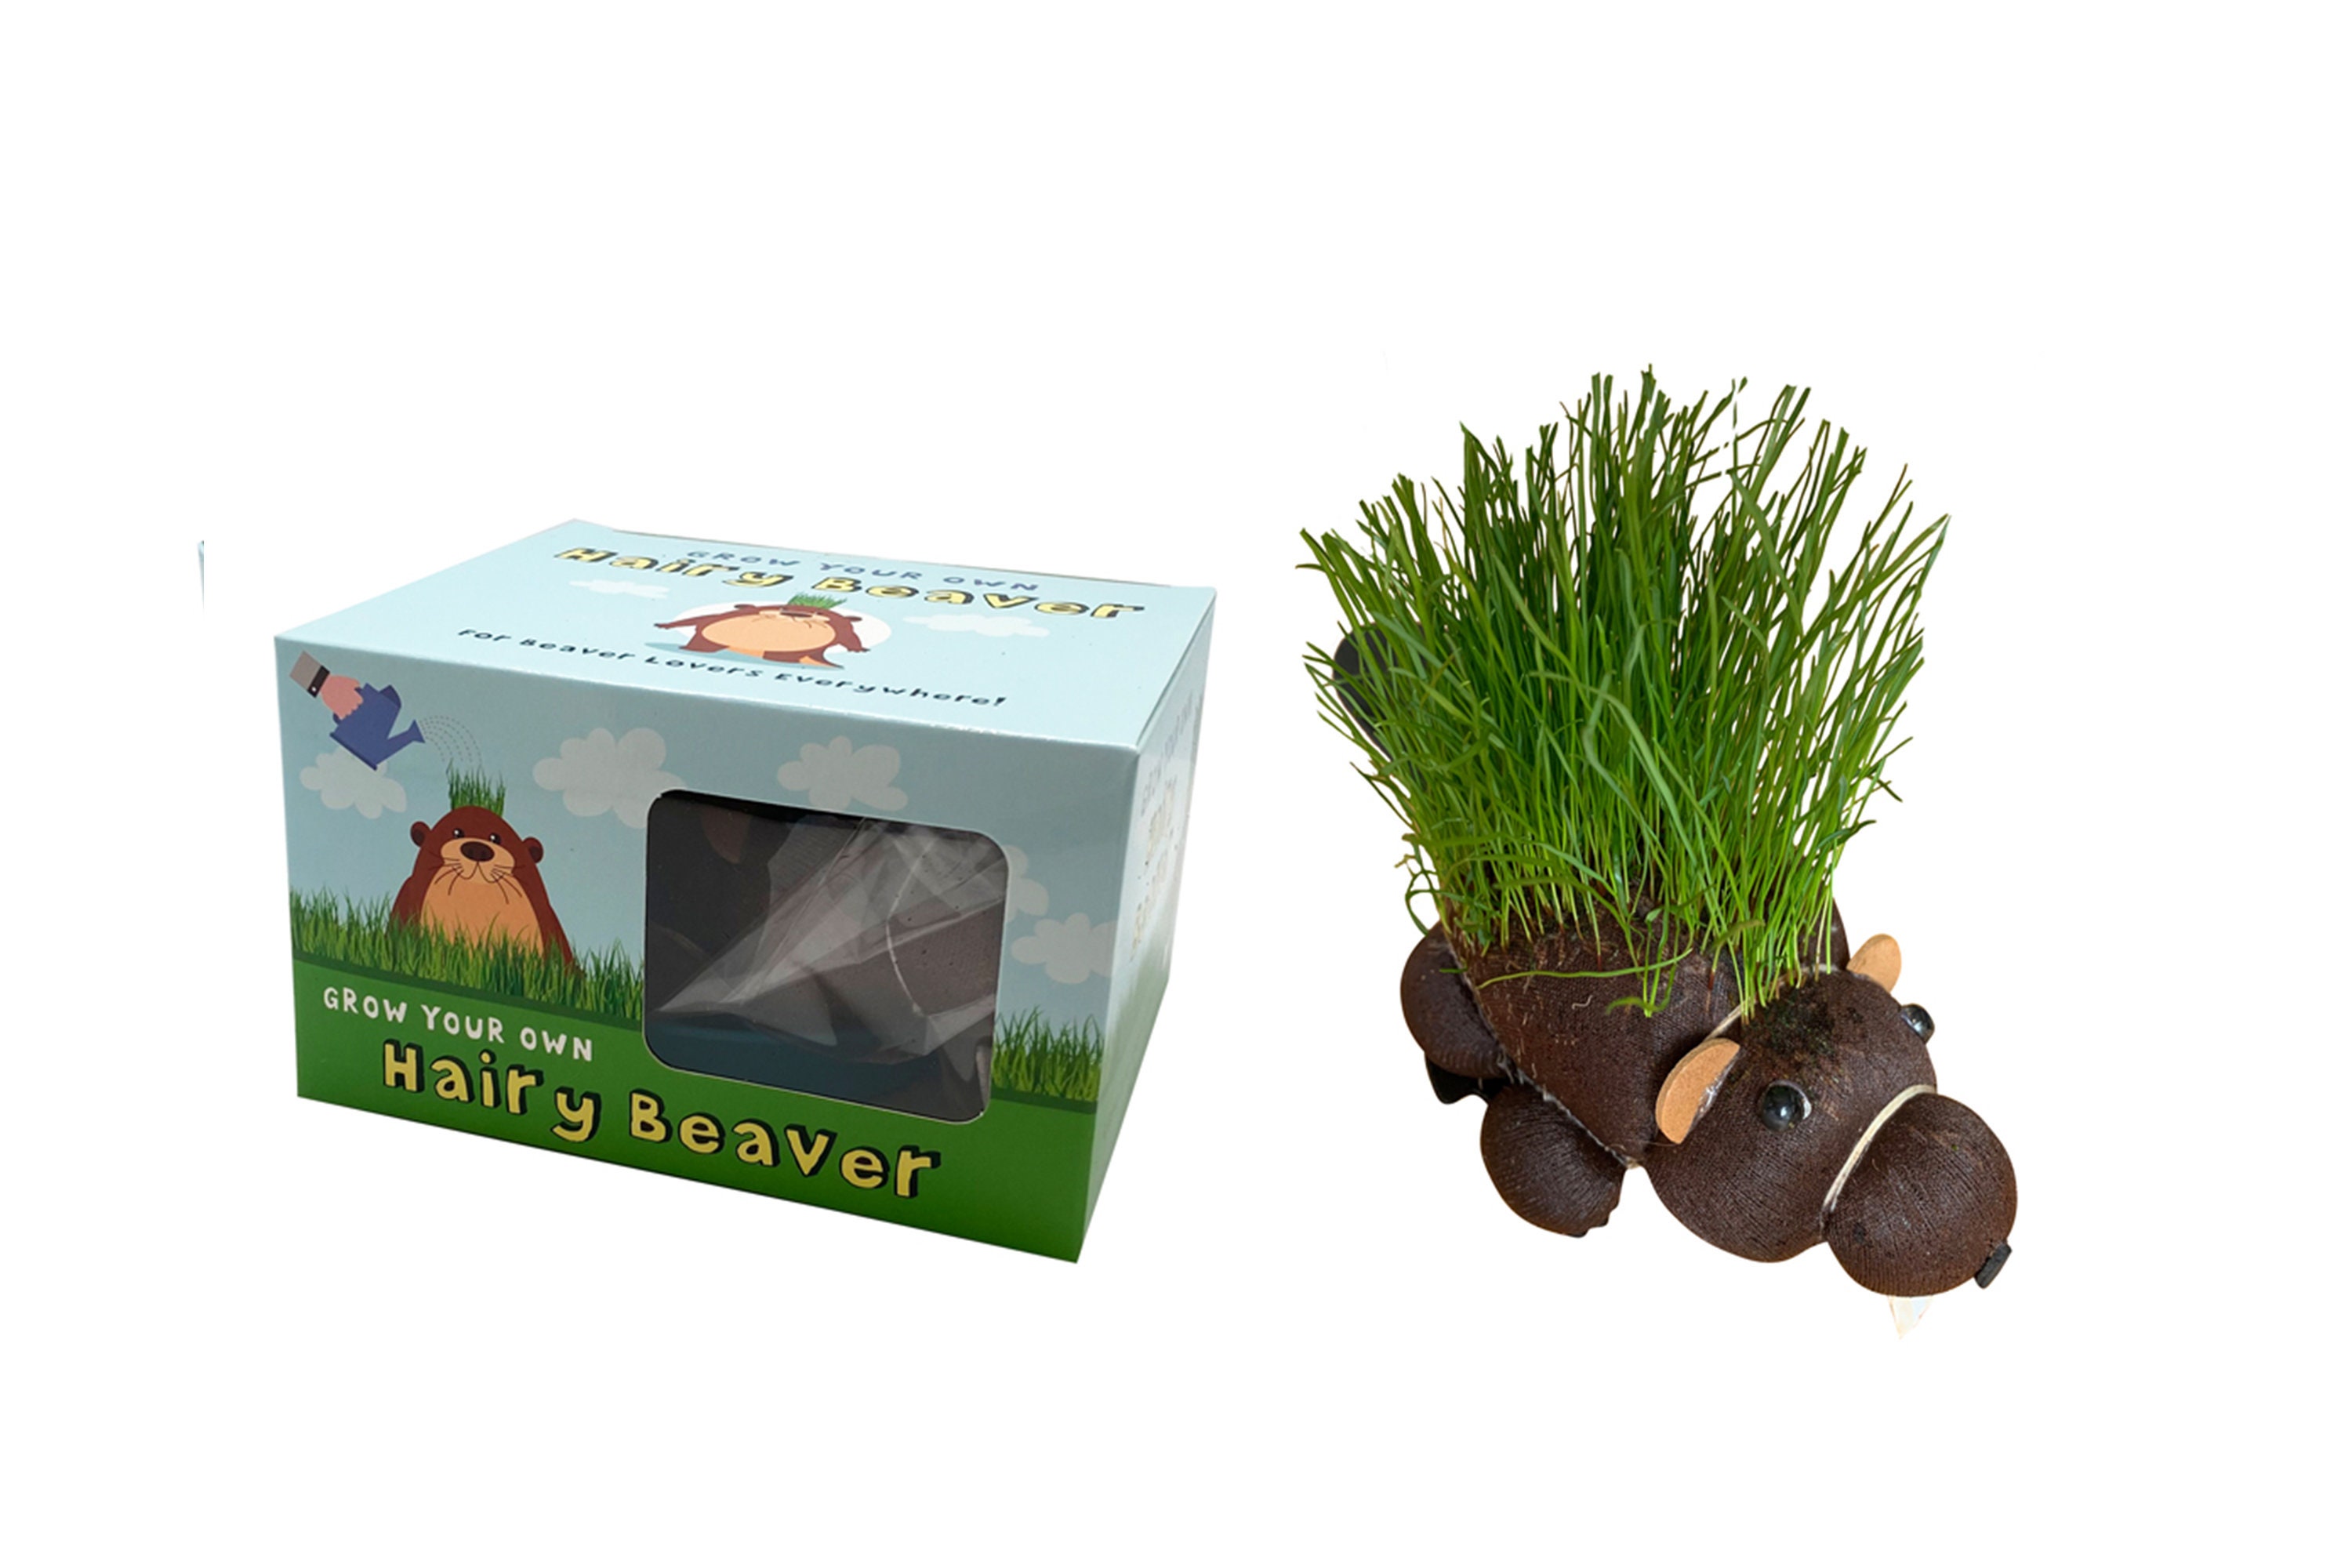 Grow your own hairy beaver